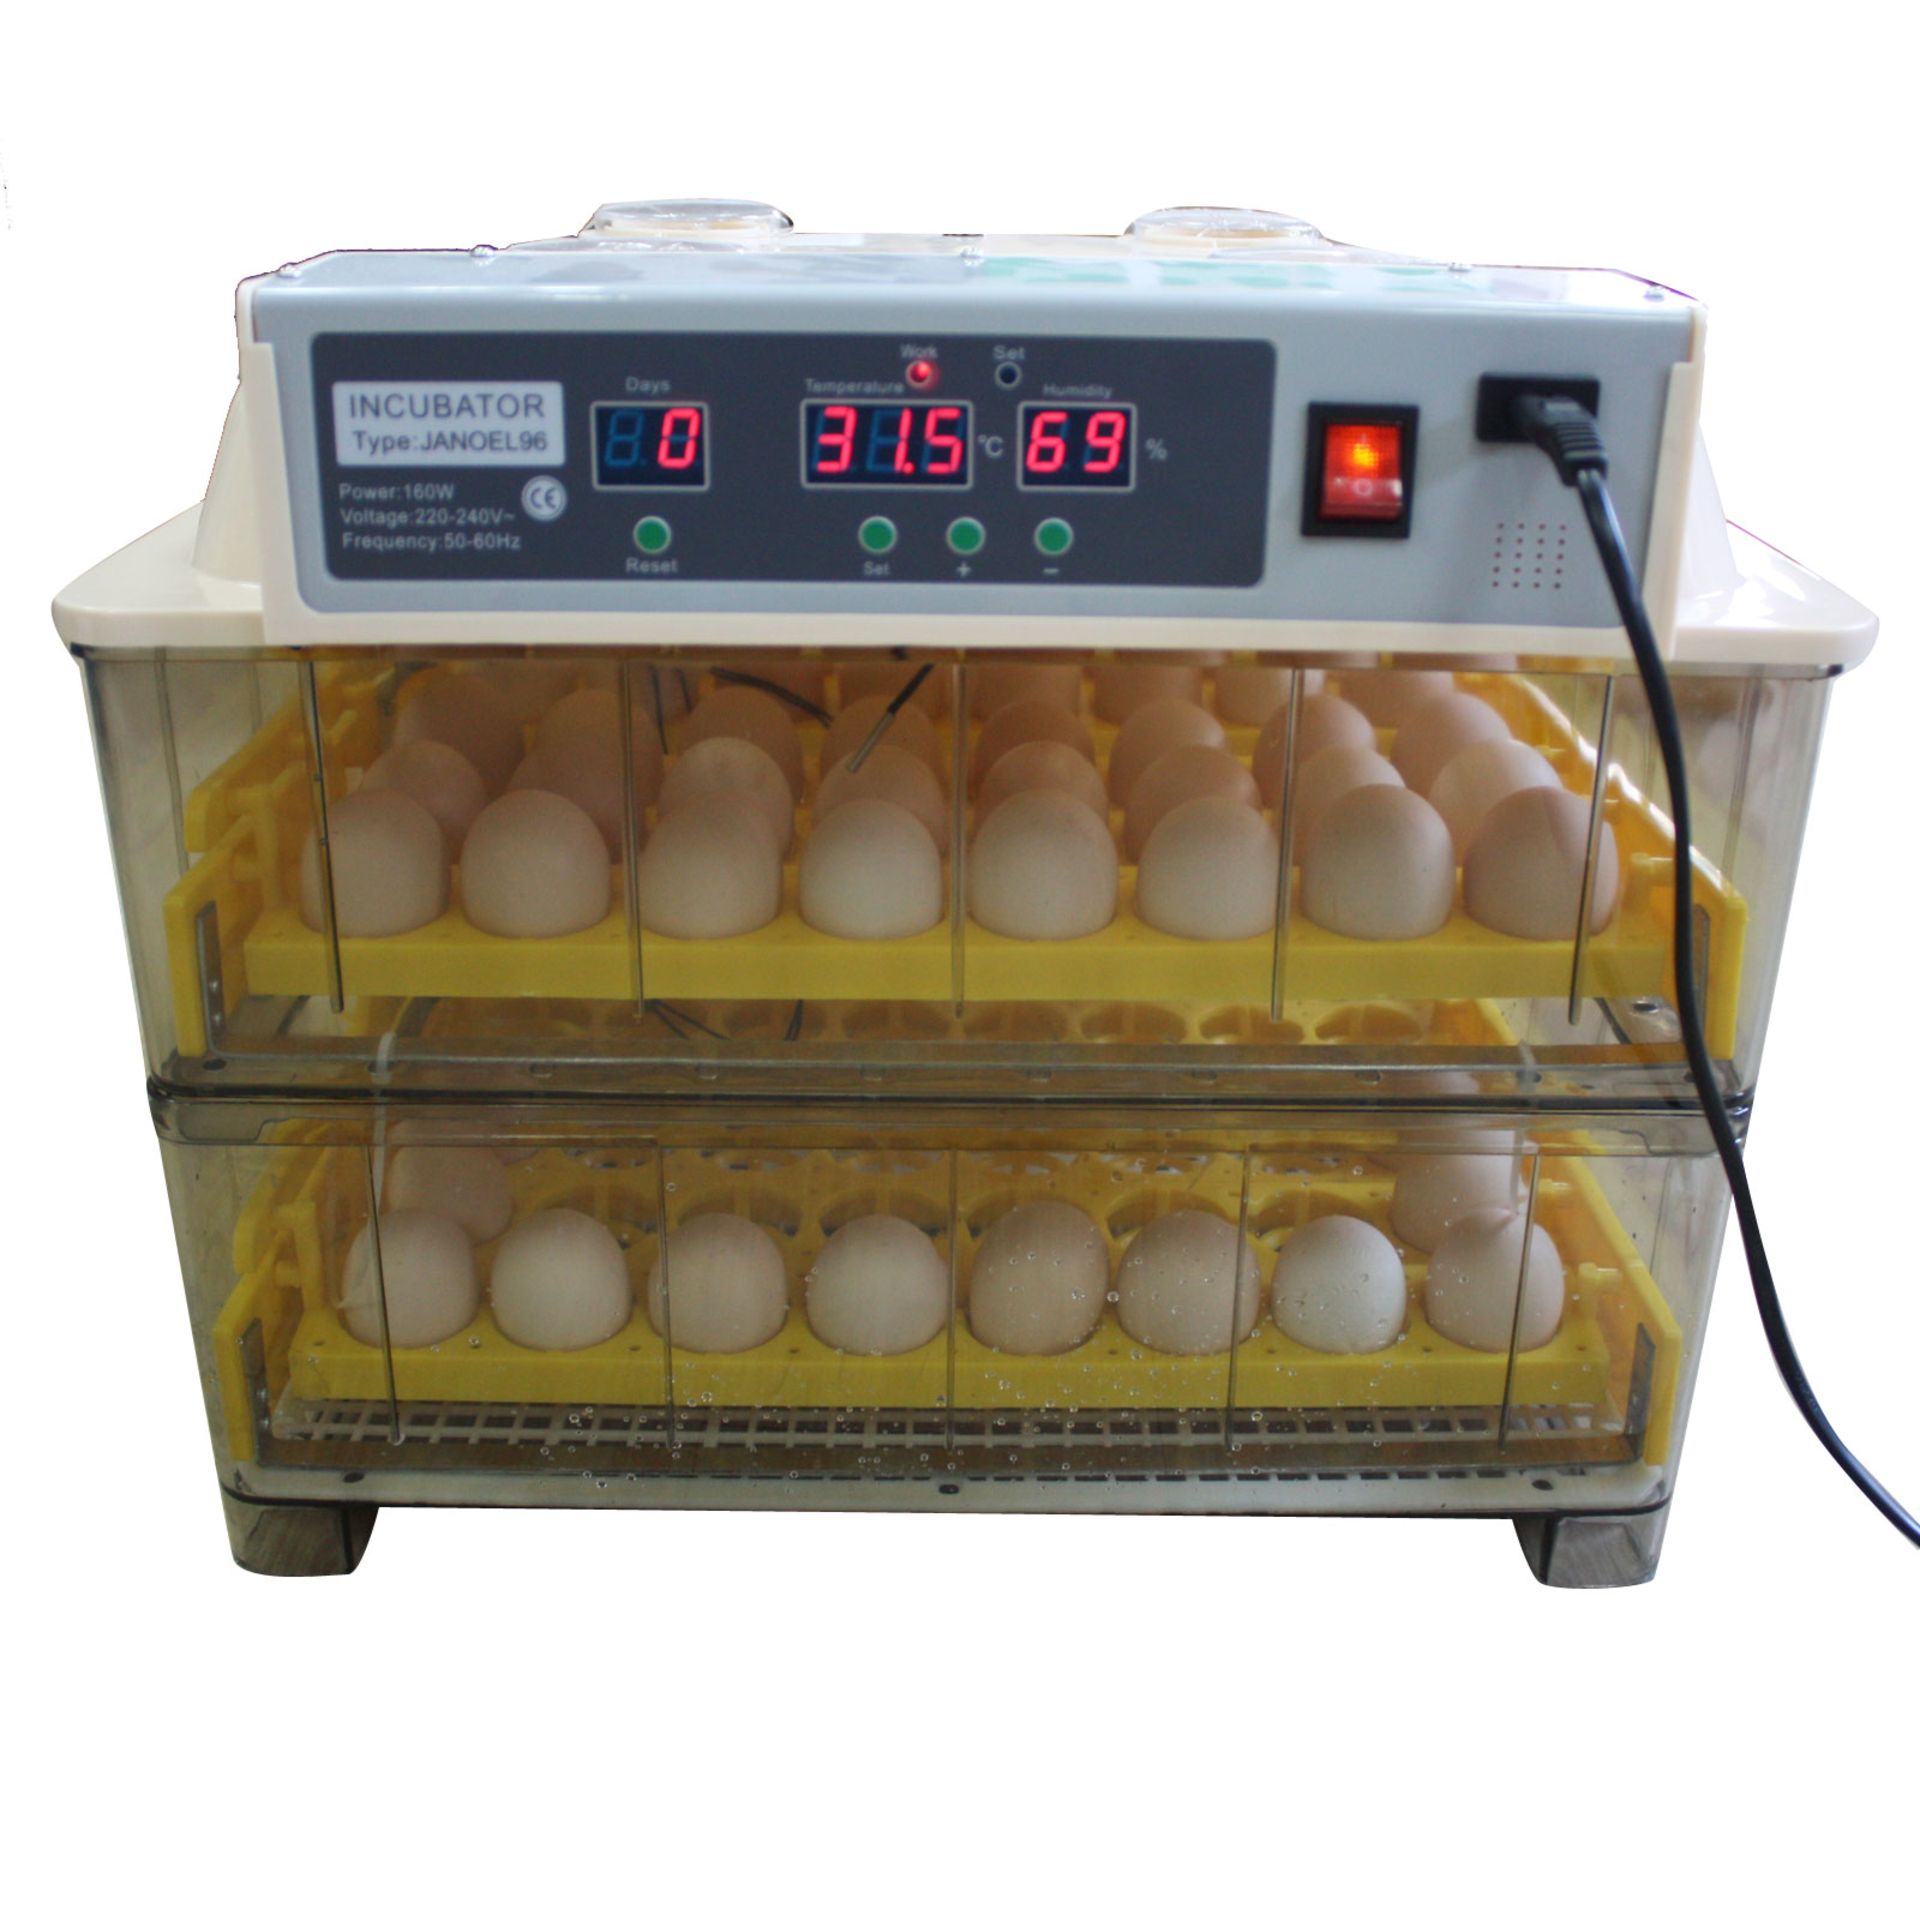 JANOEL 96 AUTOMATIC INCUBATOR - USED BUT IN AS NEW CONDITION